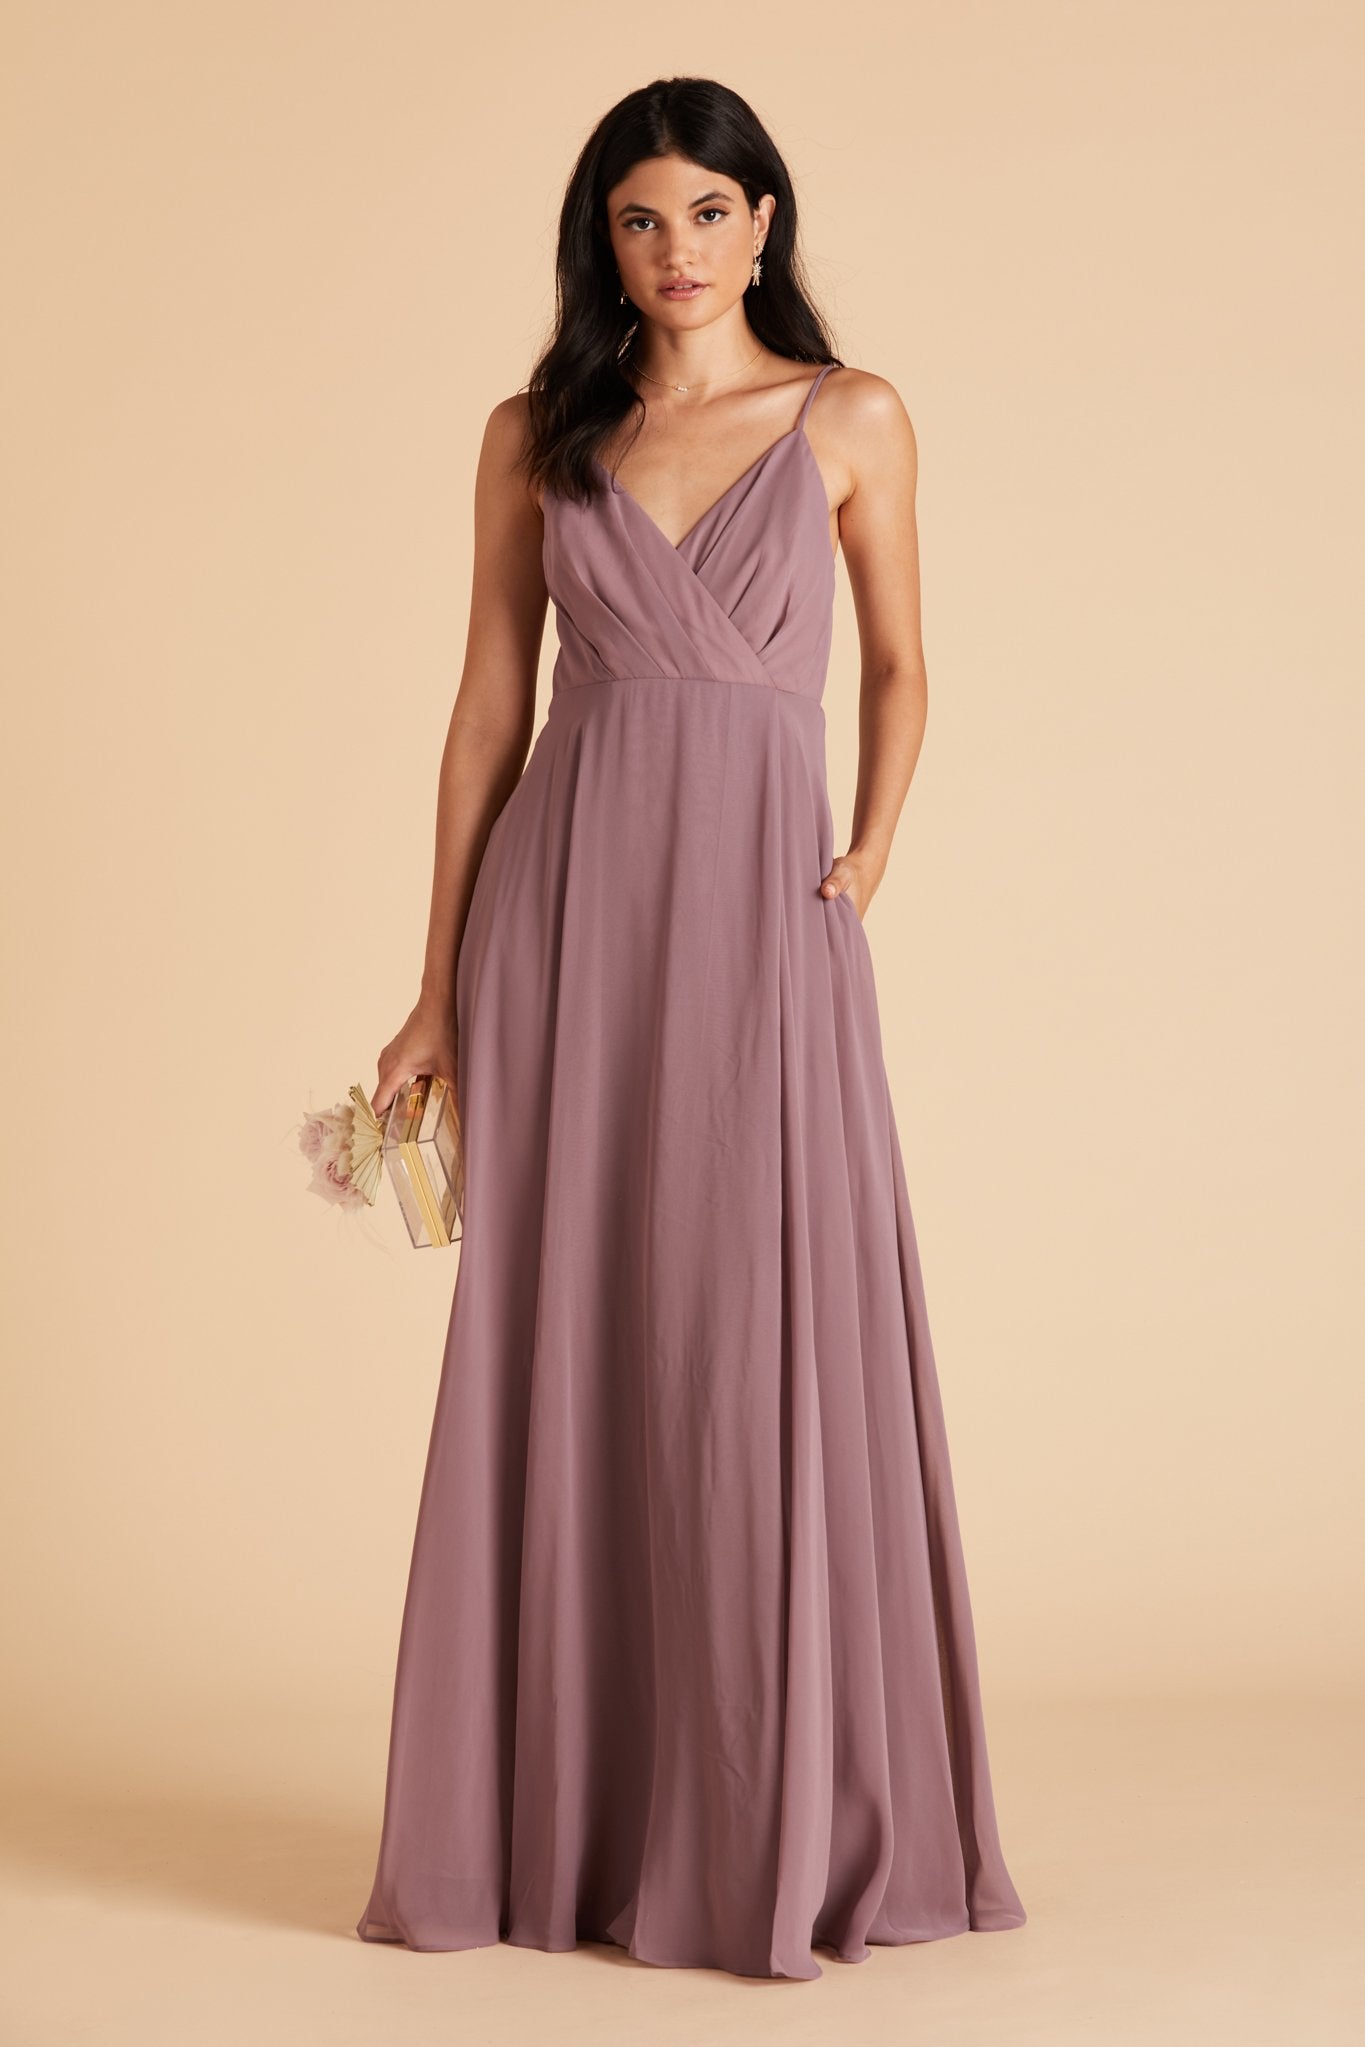 Kaia bridesmaids dress in dark mauve purple chiffon by Birdy Grey, front view with hand in pocket